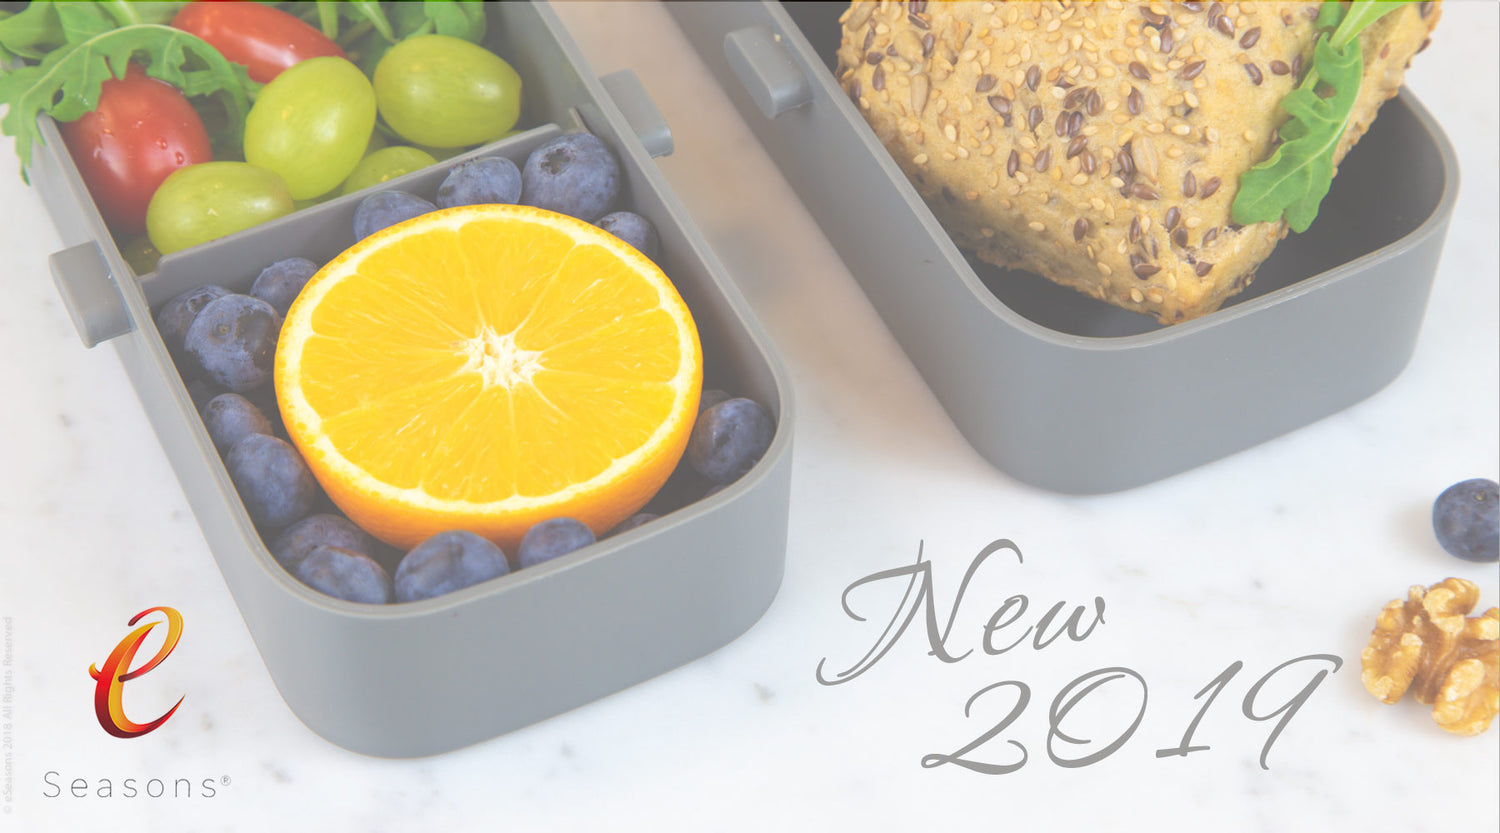 MB Sense grey Canyon - Stainless steel lunch box - The metal bento meeting  all your needs